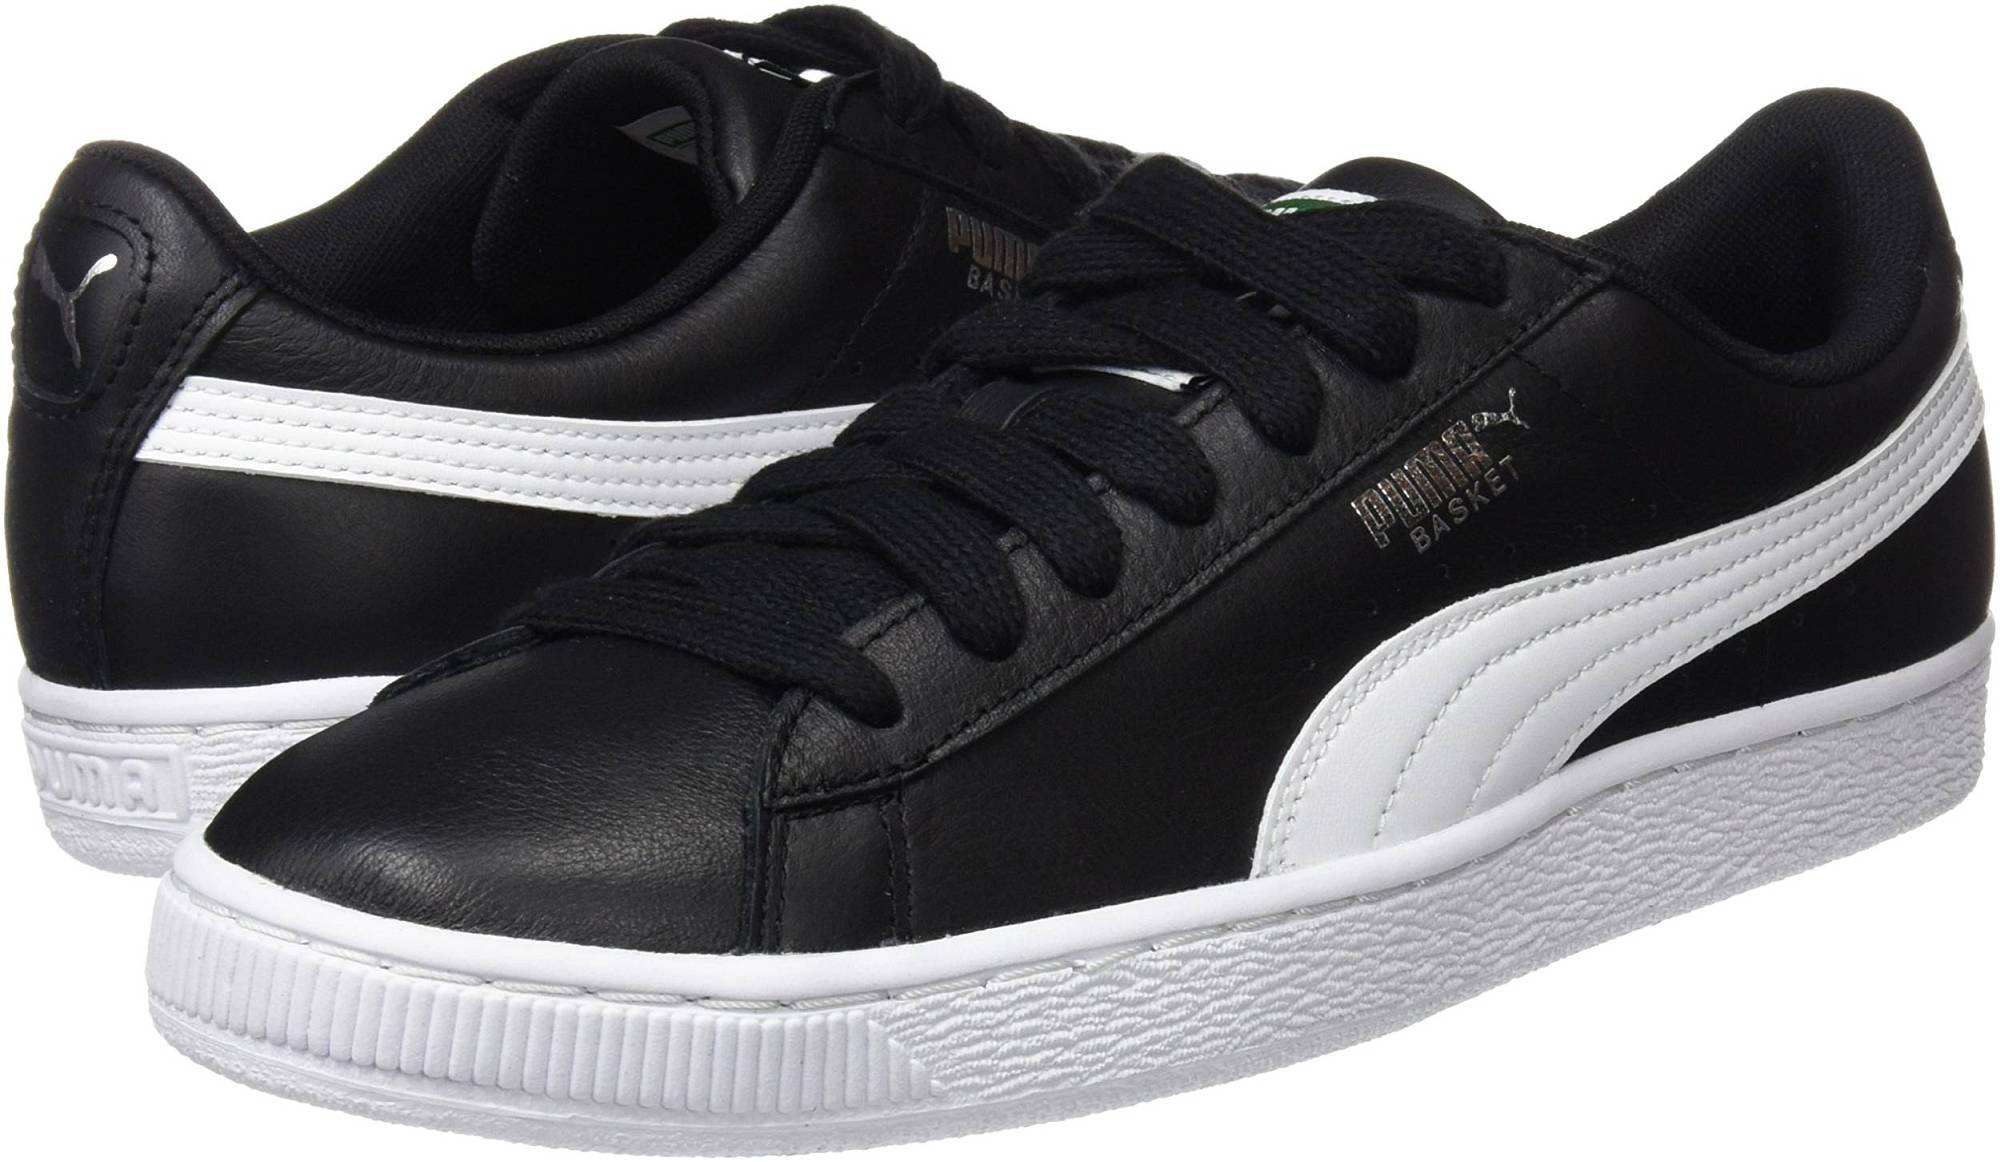 Puma Heritage Basket Classic – Shoes Reviews & Reasons To Buy